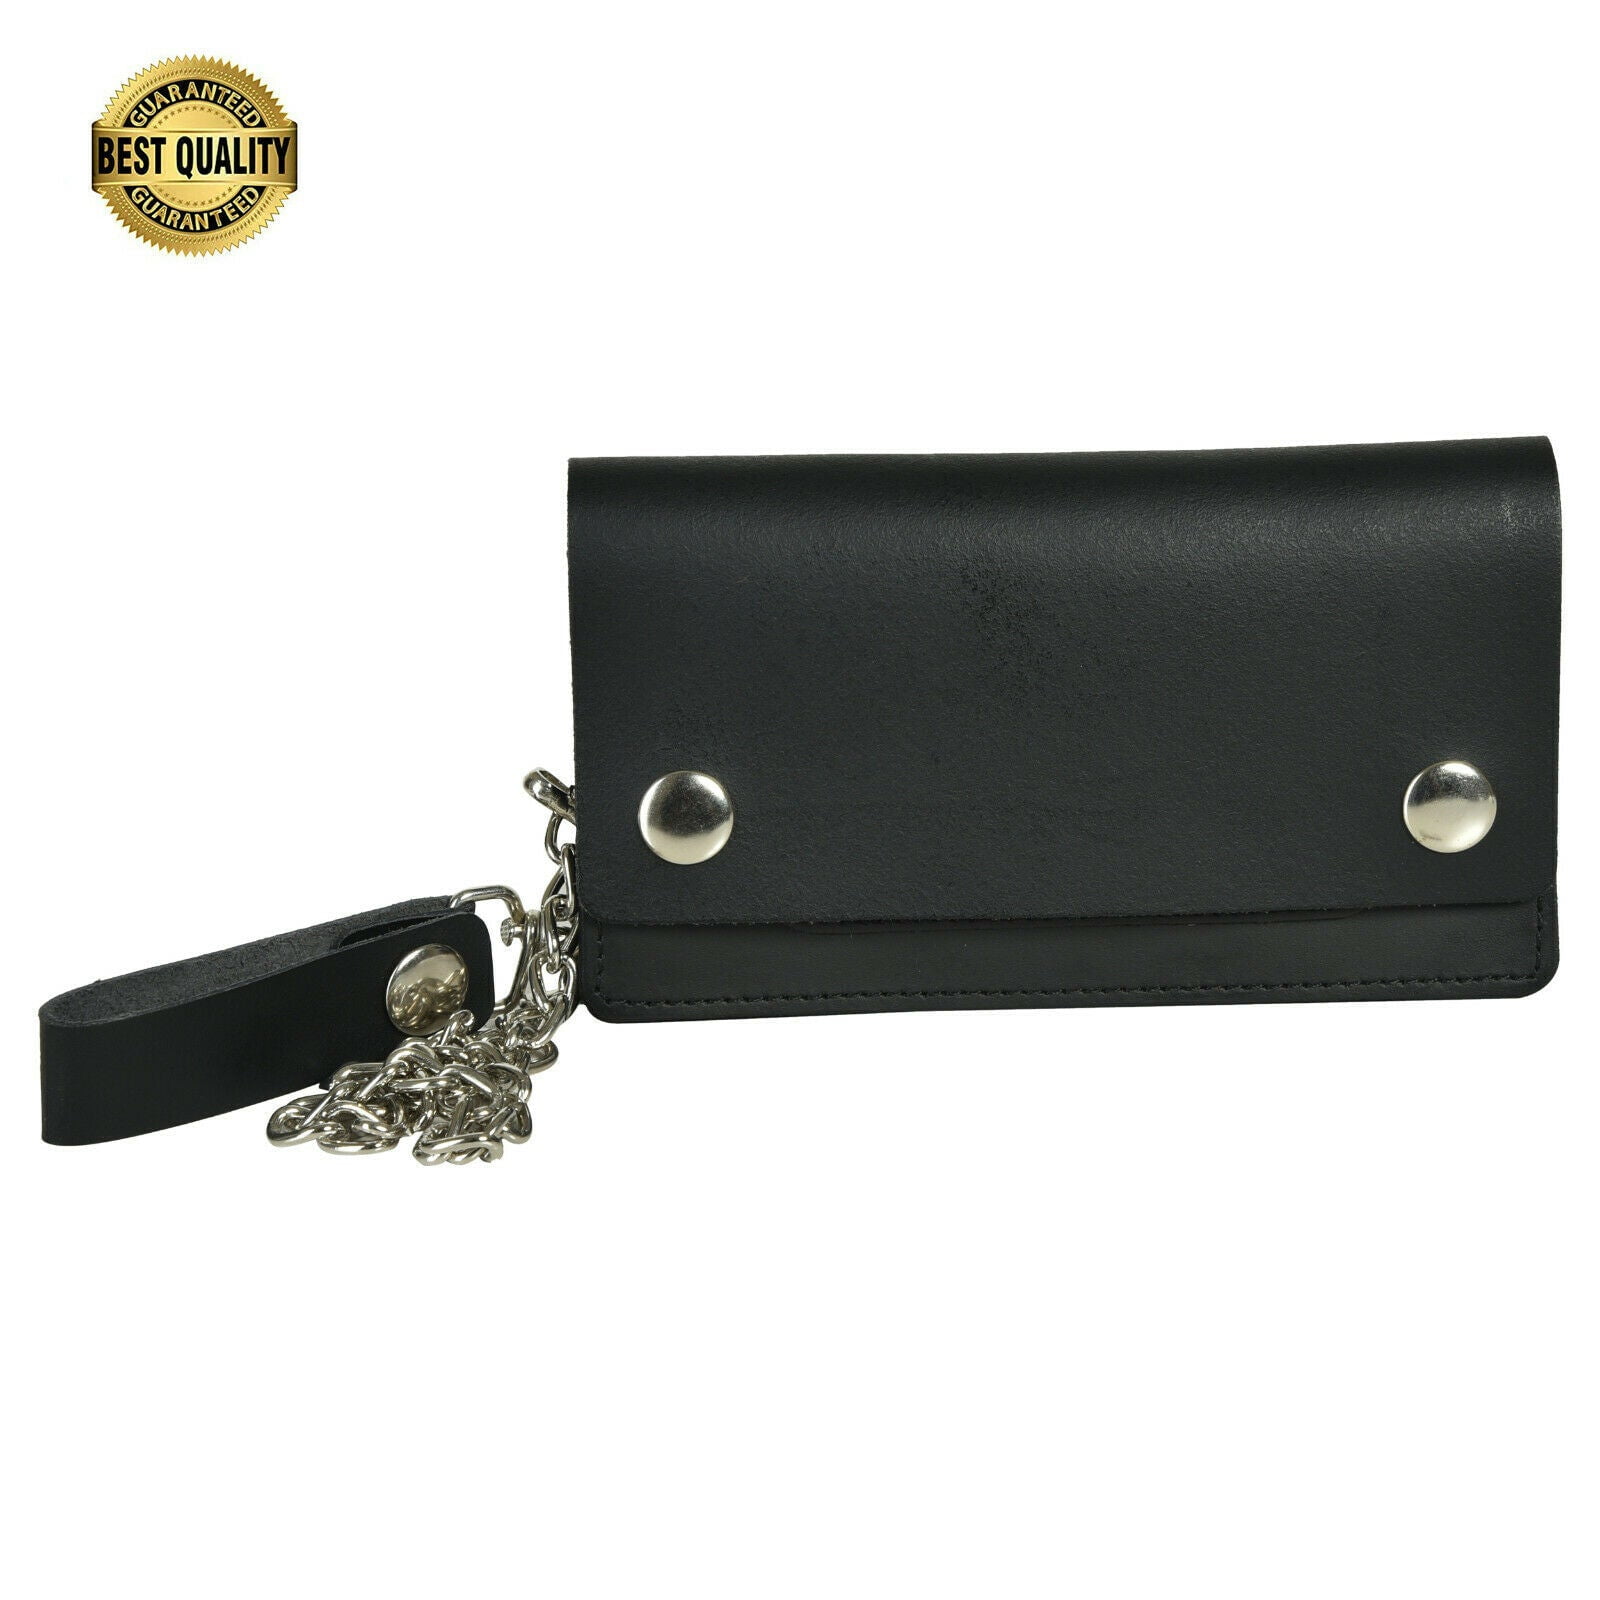 Men's Chain Wallets, Small Leather Goods